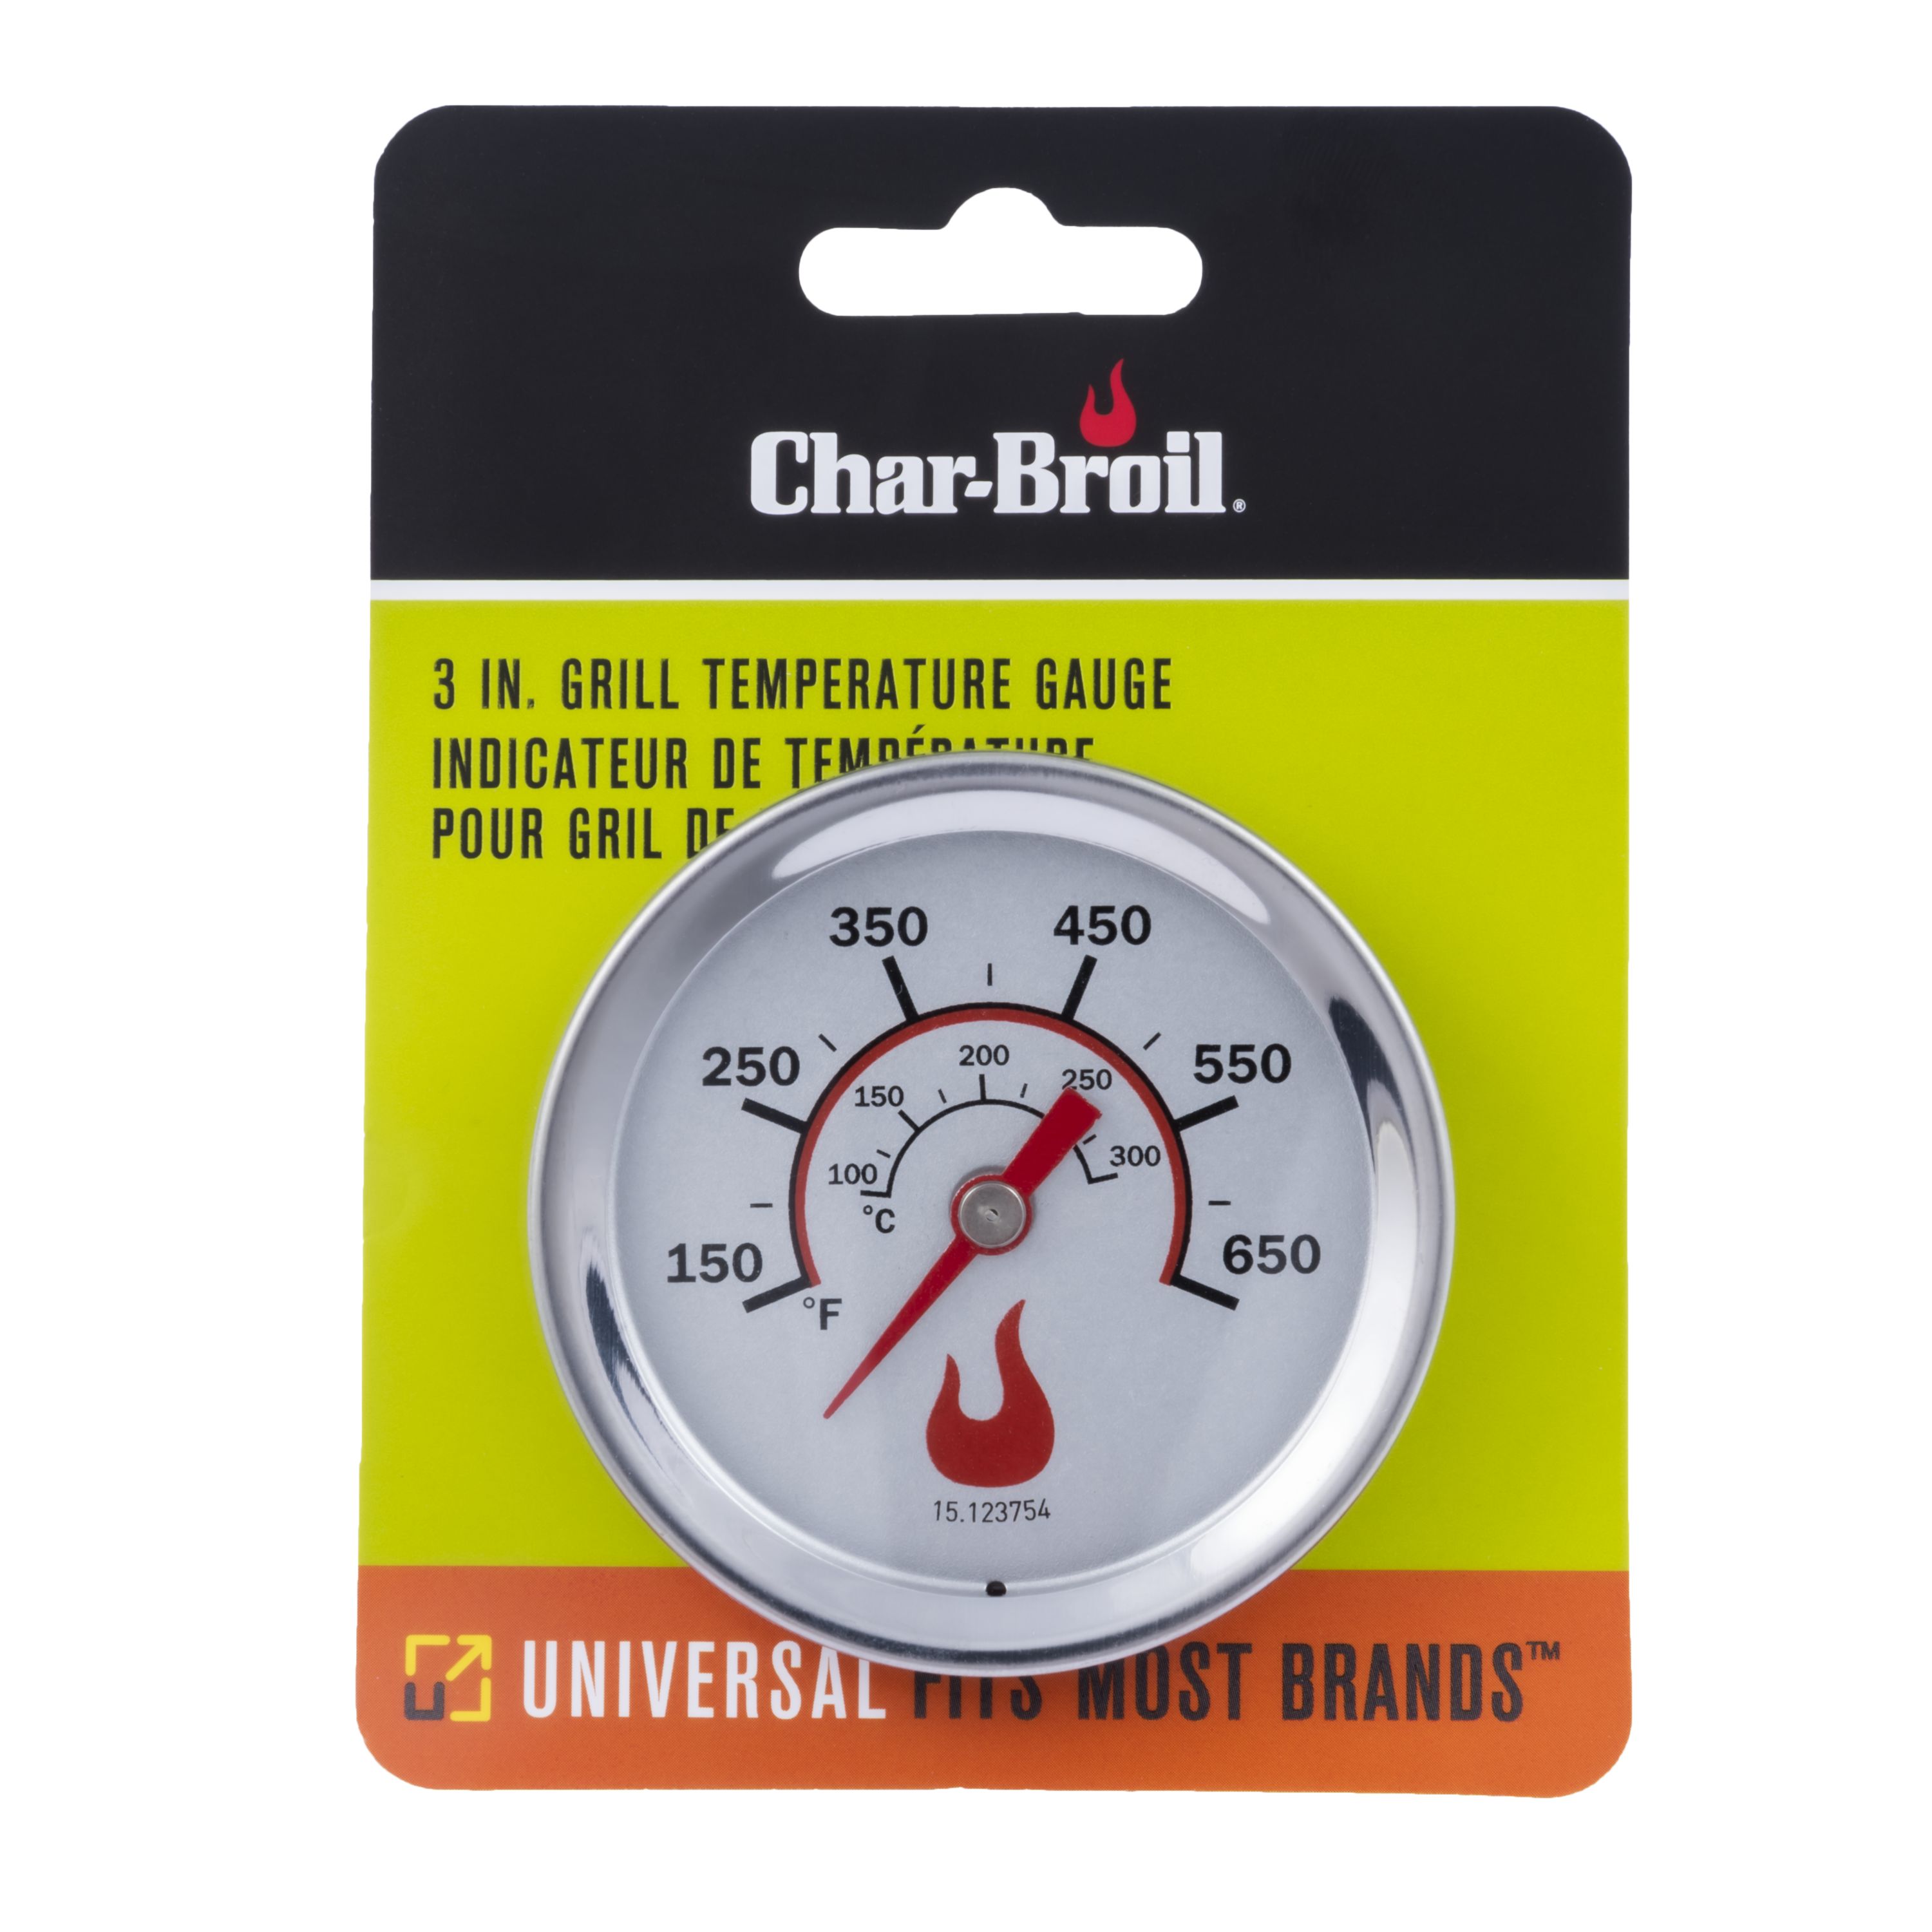 Stainless Steel Semicircle Heat Indicator Thermometer For Char Broil Grill Parts 